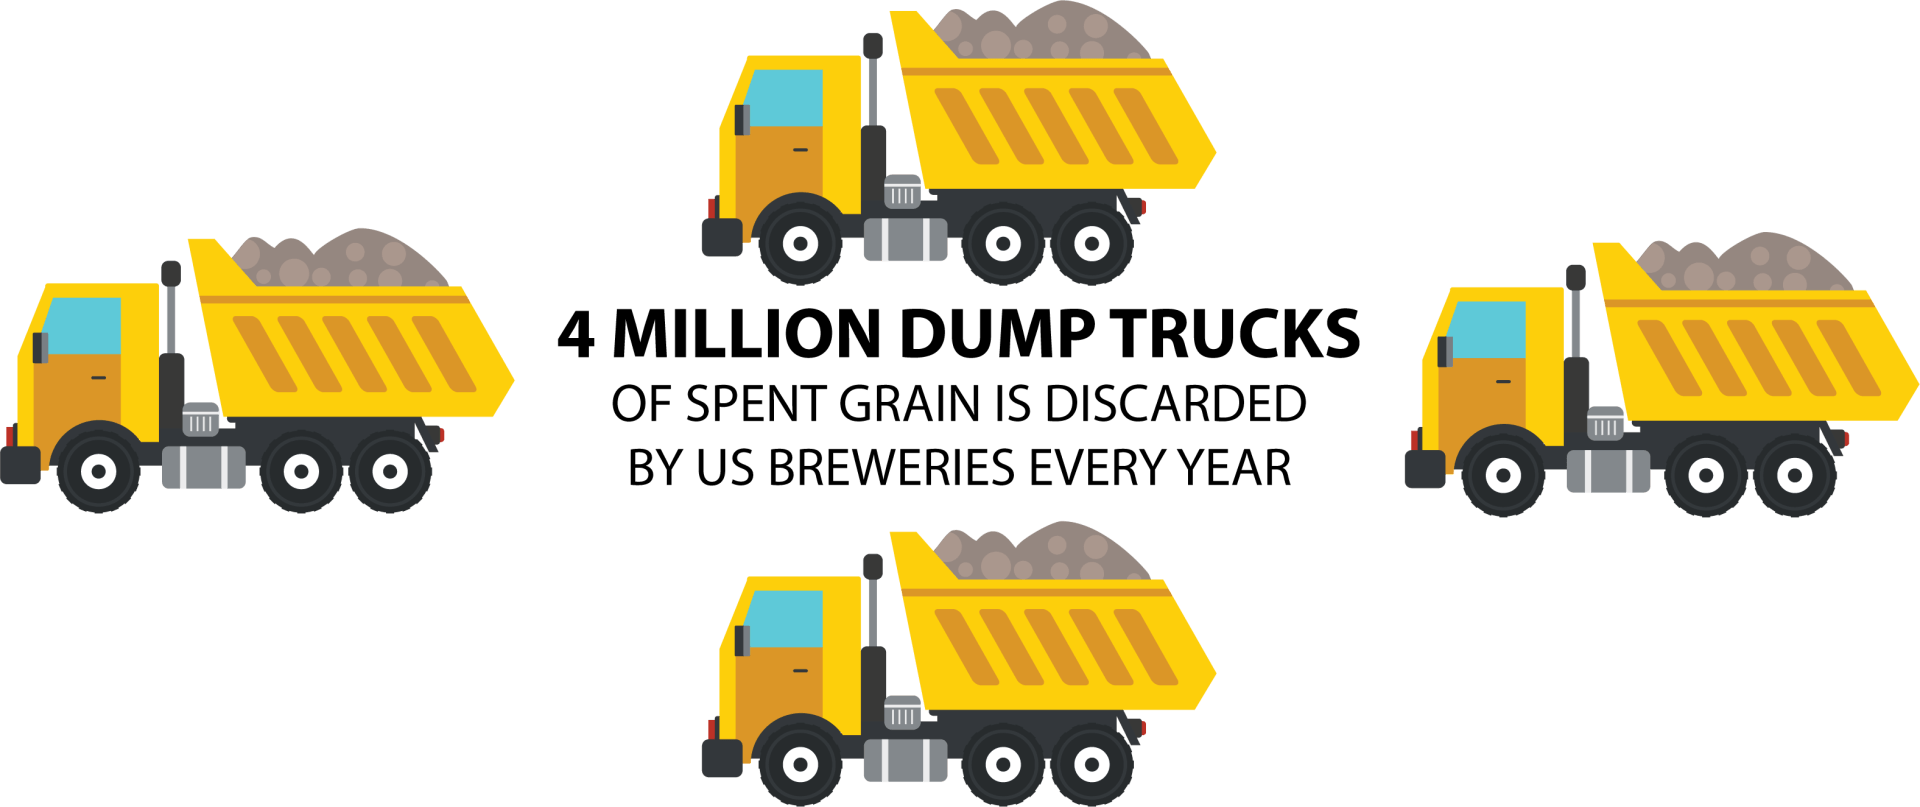 4 million dump trucks of spent grain is wasted every year